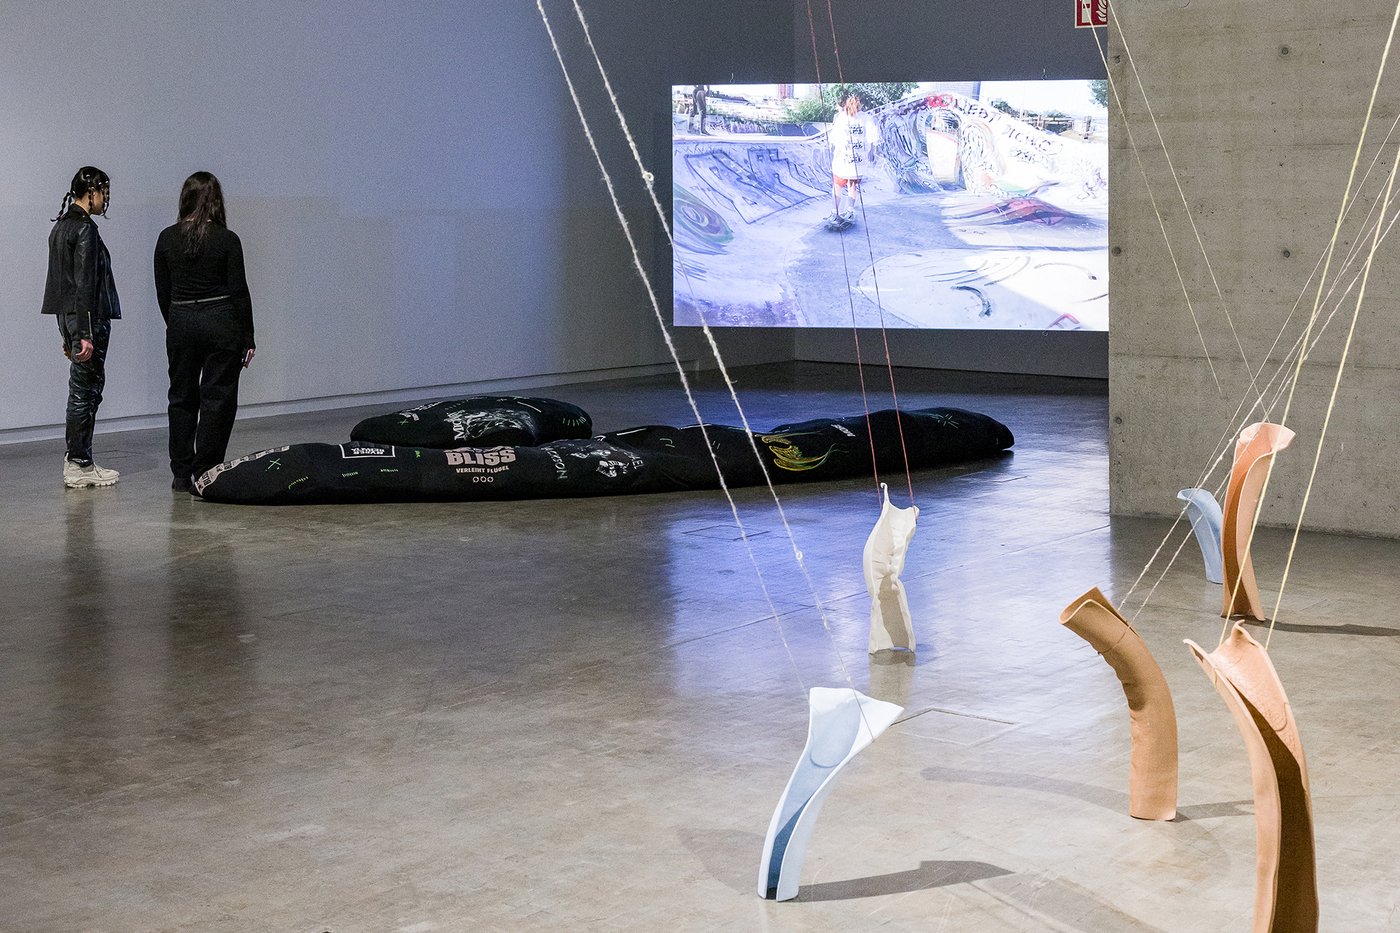 Exhibition view: on the gray floor in the foreground lies an exhibition object on the floor that looks like a large black beanbag - printed with terms - in front of it some colorful objects attached to strings, on the left of the picture two people in black clothes and in the background a screen with a video still on which a skateboard with a person can be seen.